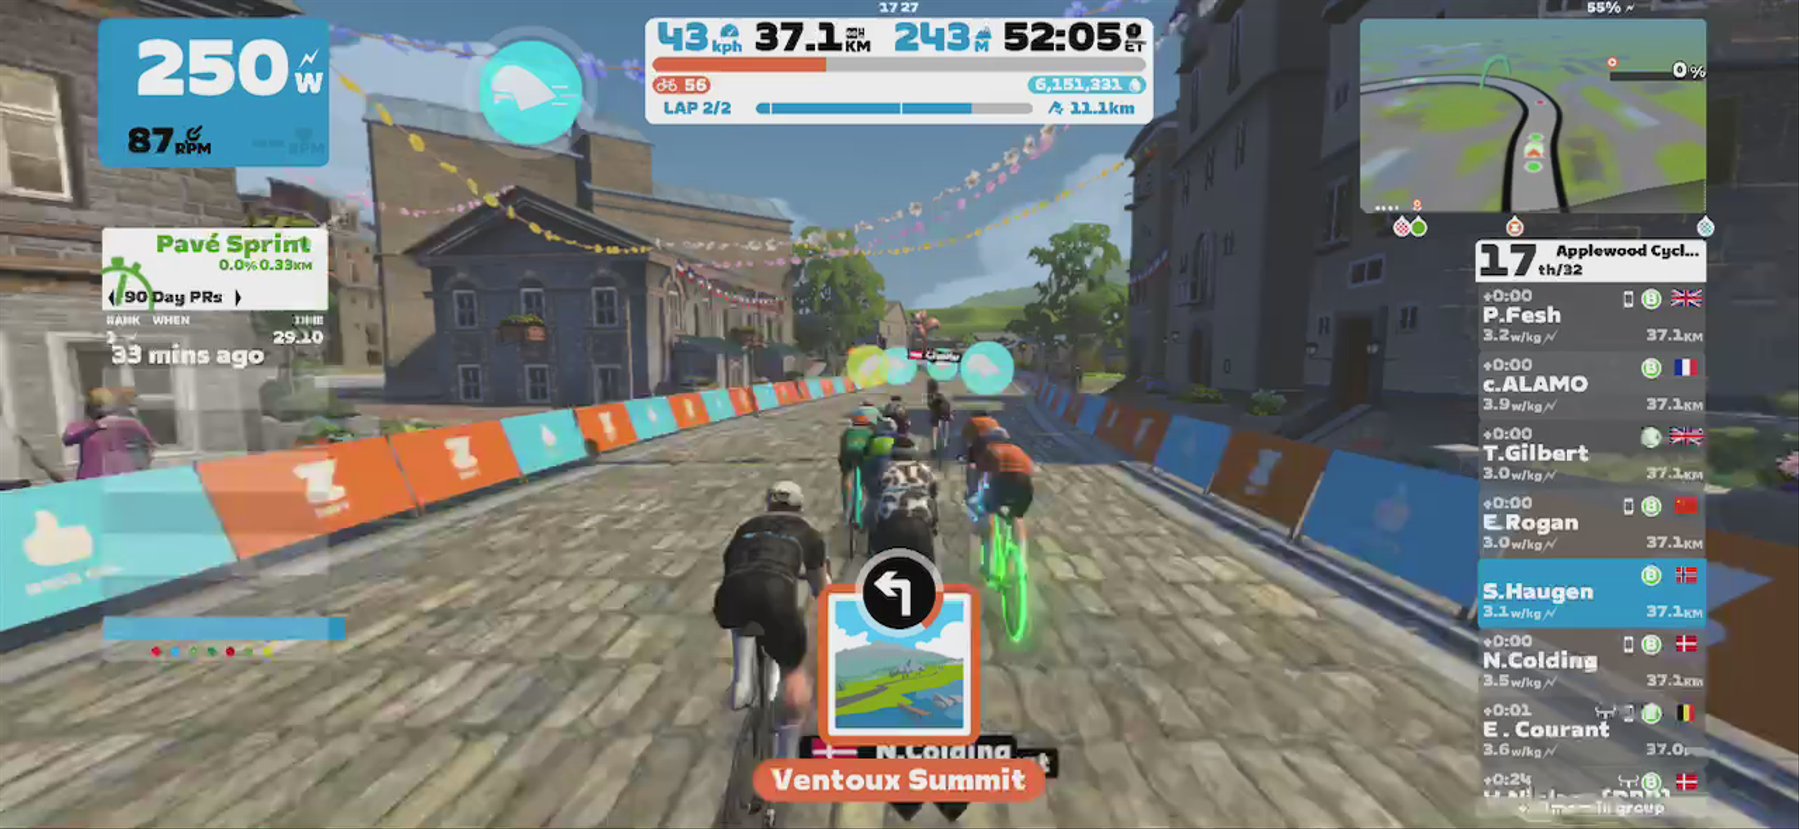 Zwift - Race: Applewood Cycling Chase Race on Douce France in France